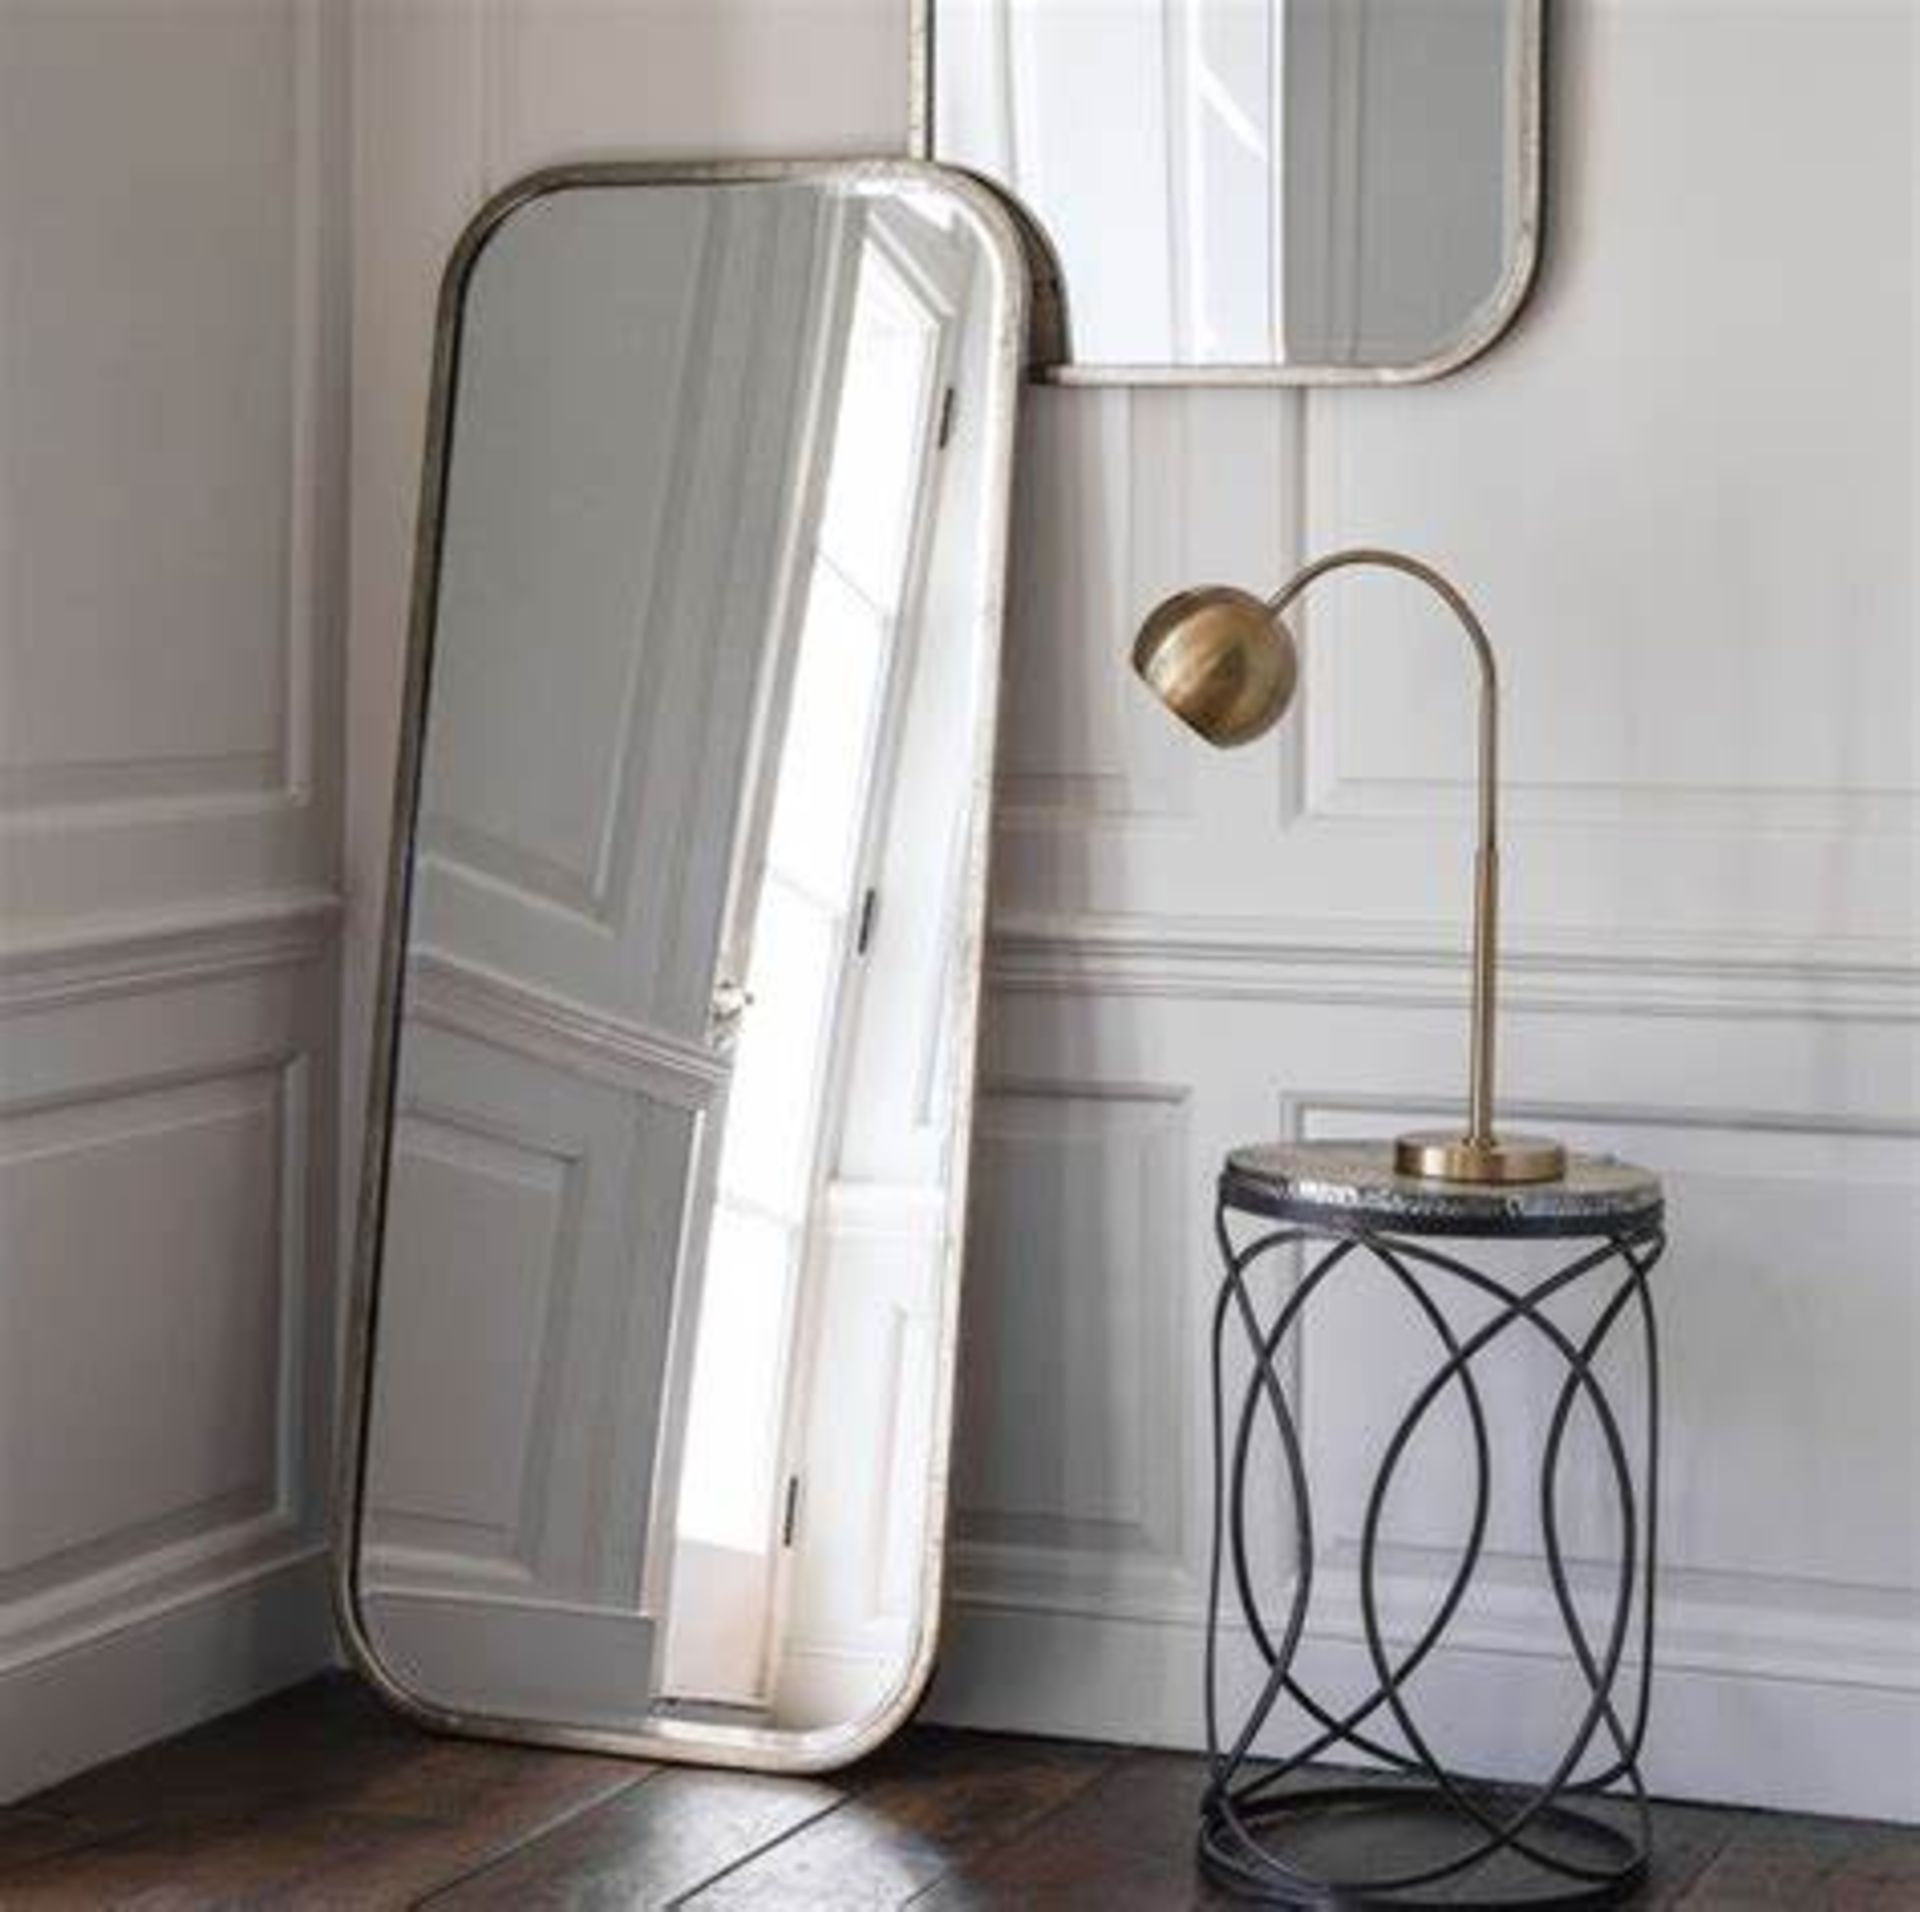 Logan Rectangle Mirror W655 X D20 X H955mm Contemporary Full Length Mirror Featuring Simple Curved